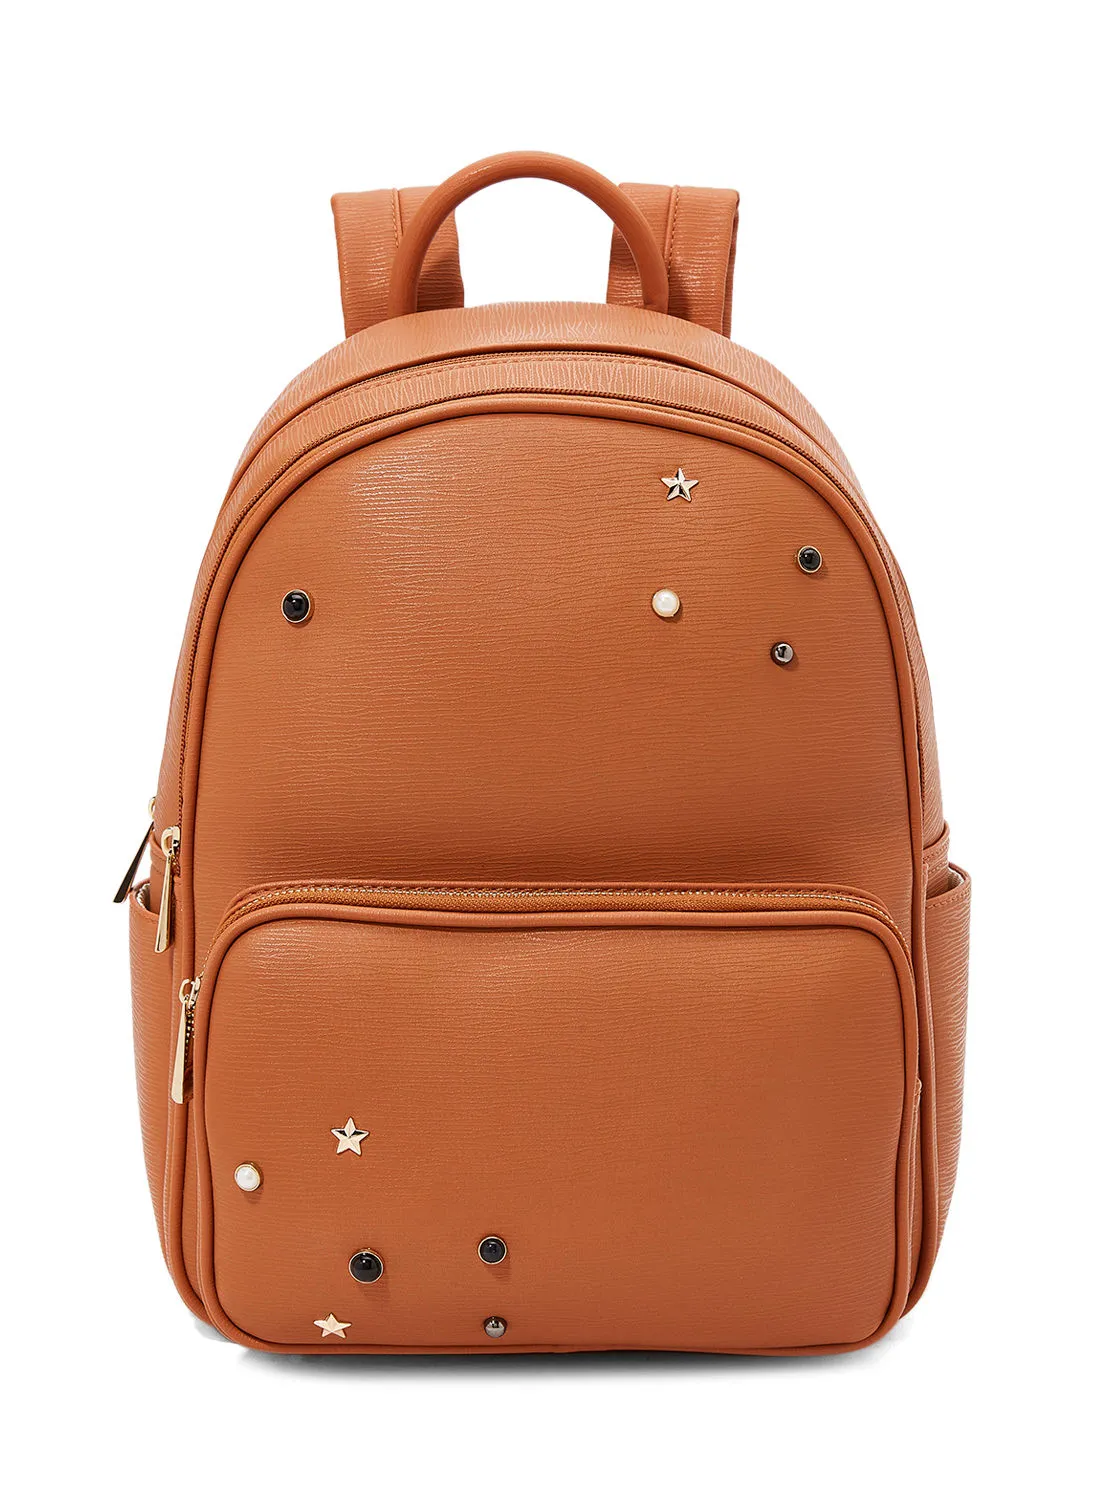 YUEJIN Faux Leather Backpack Brown